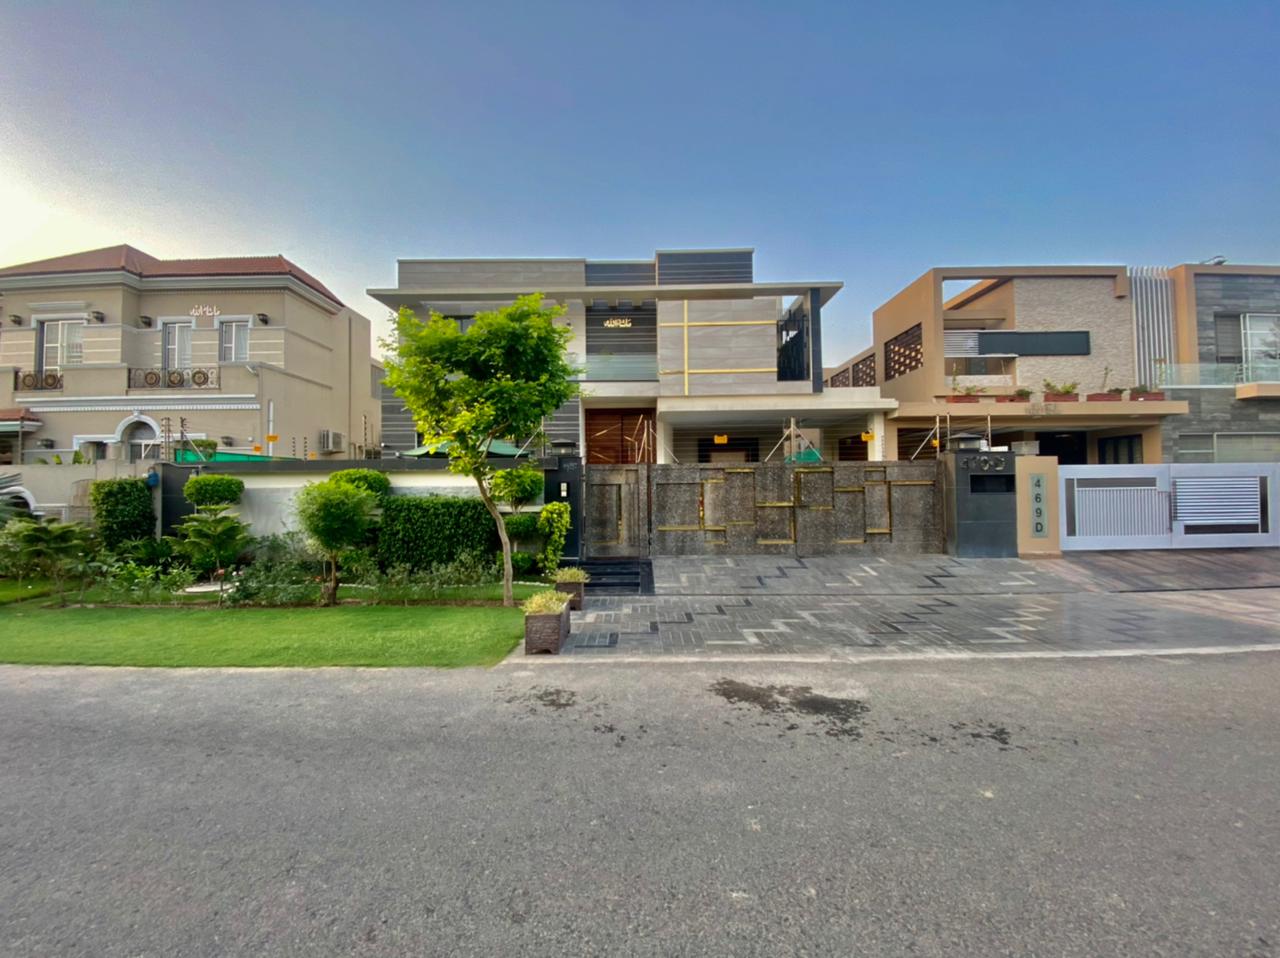 1 Kanal Slightly Used Furnished House For SALE In DHA Phase 5